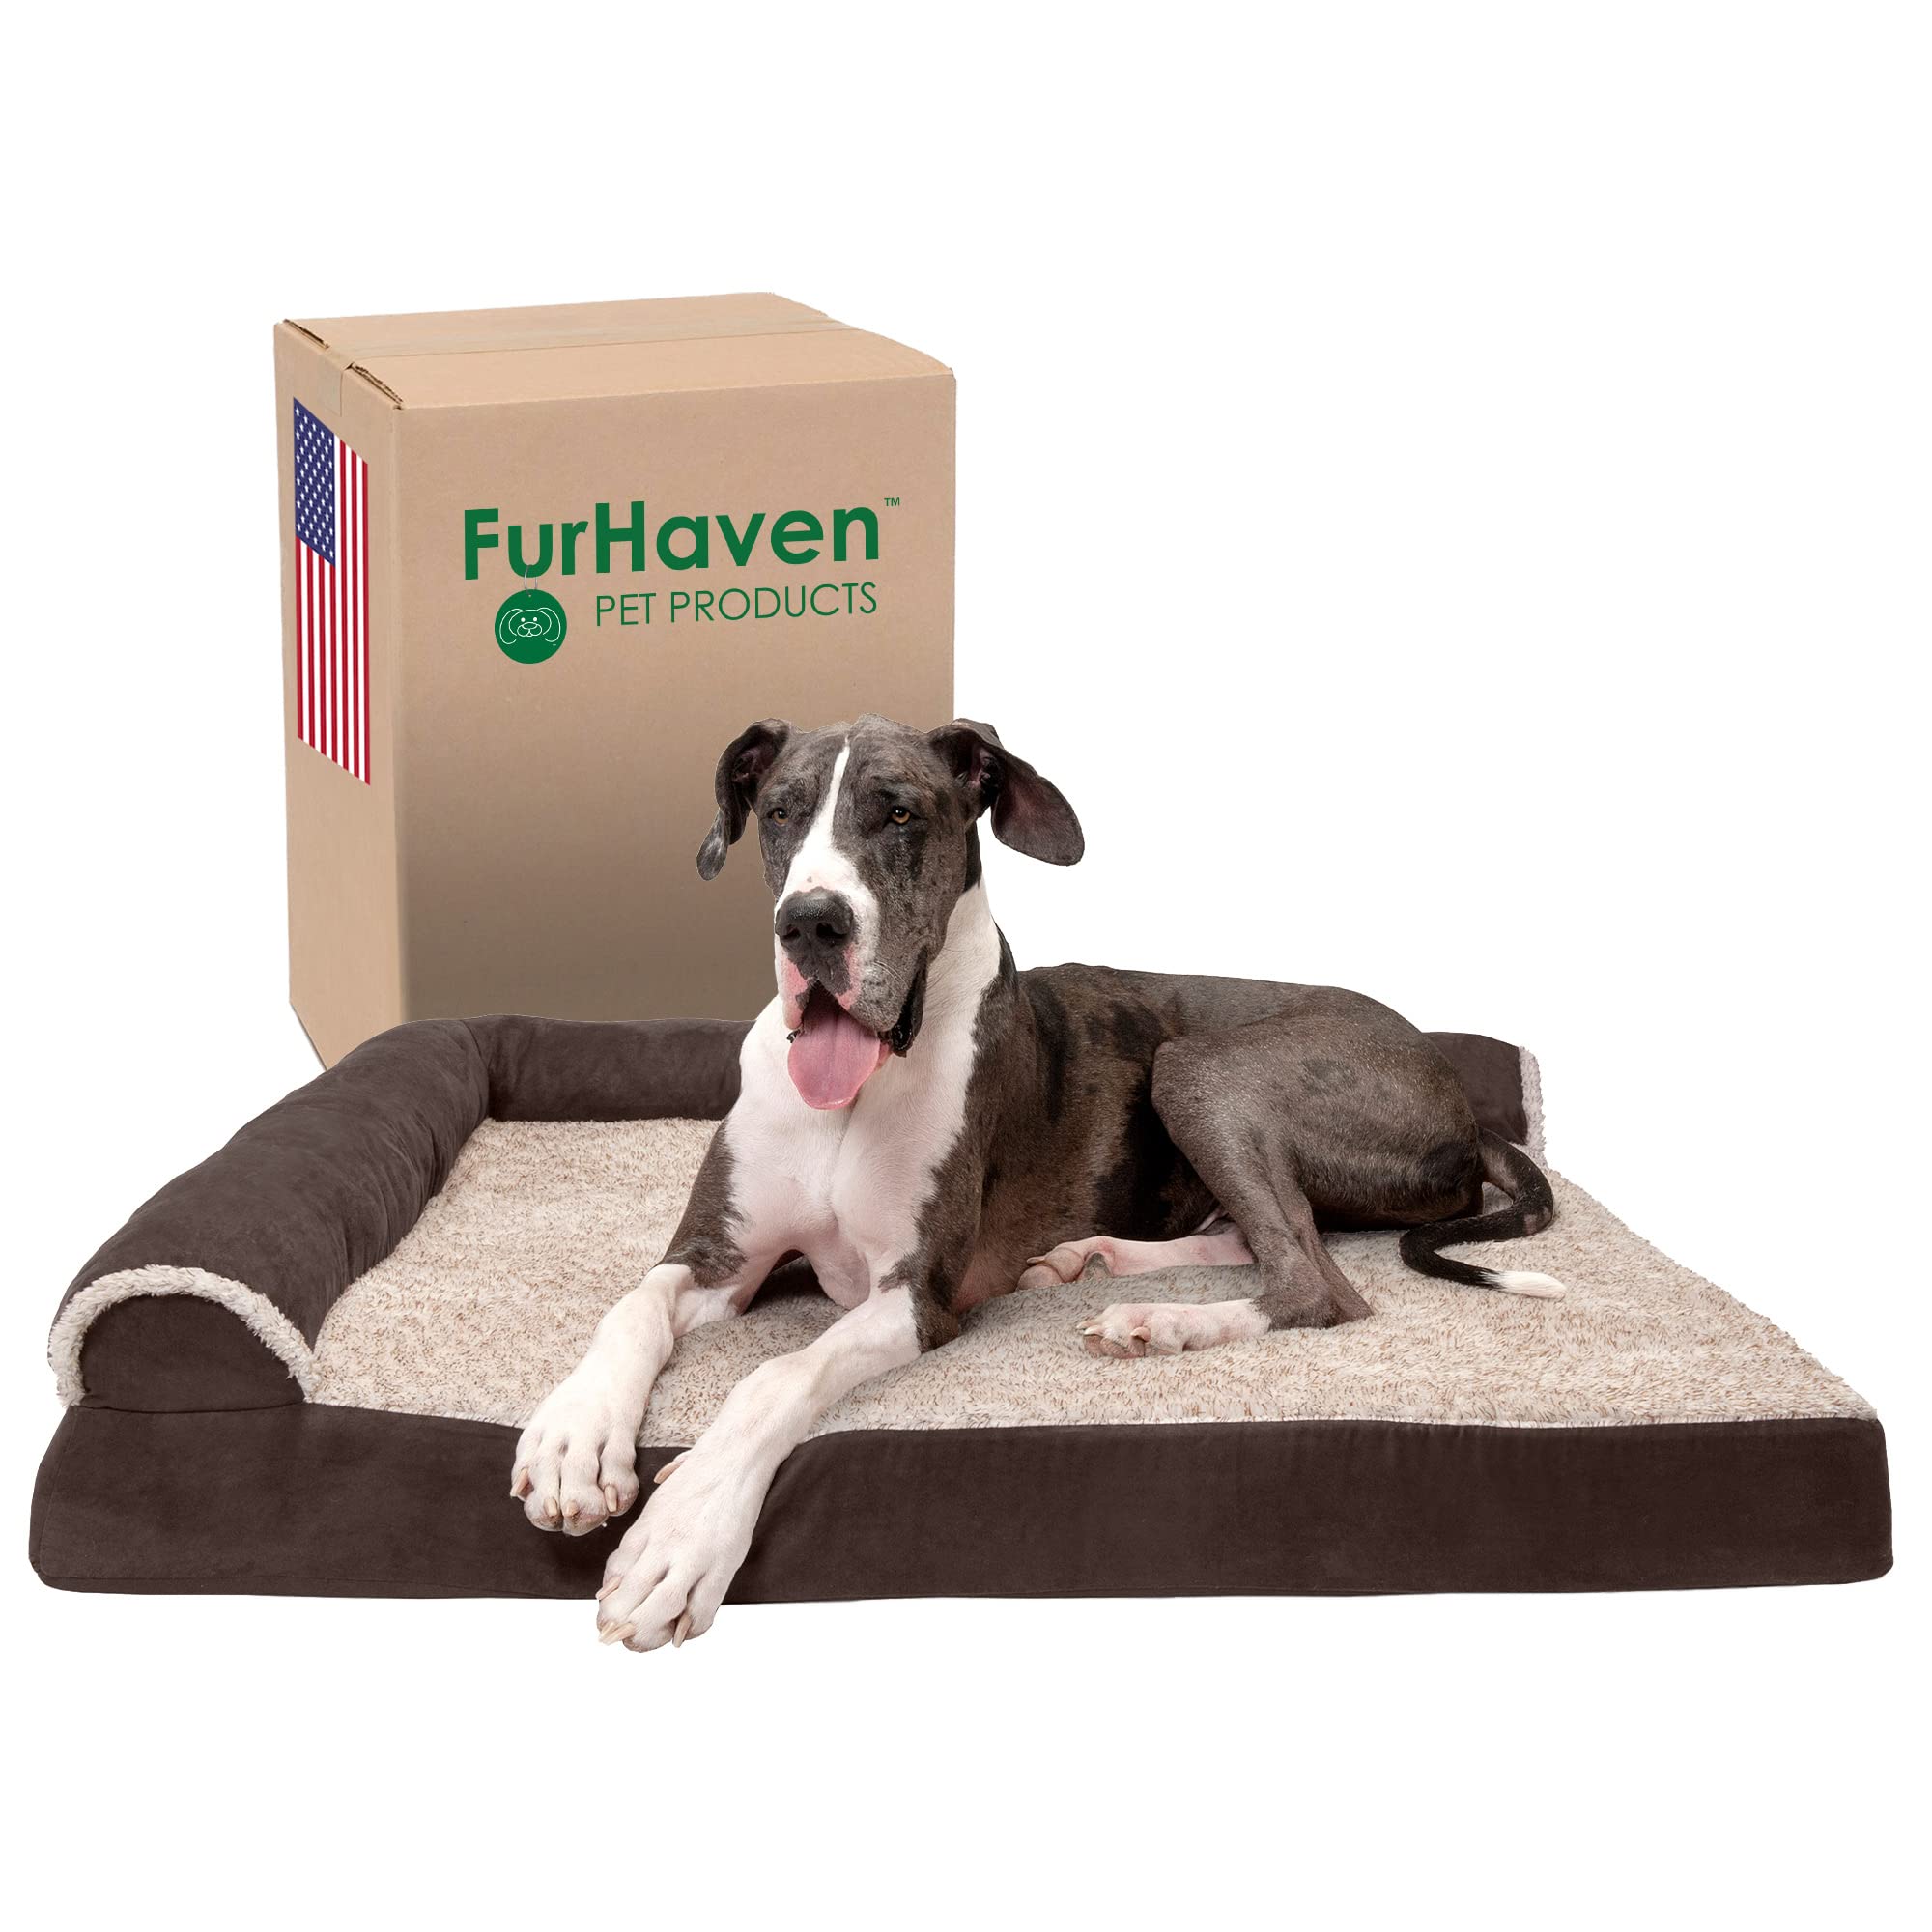 Furhaven Orthopedic Dog Bed for Large Dogs w/ Removable Bolsters & Washable Cover, For Dogs Up to 125 lbs - Two-Tone Plush Faux Fur & Suede L Shaped Chaise - Espresso, Jumbo Plus/XXL